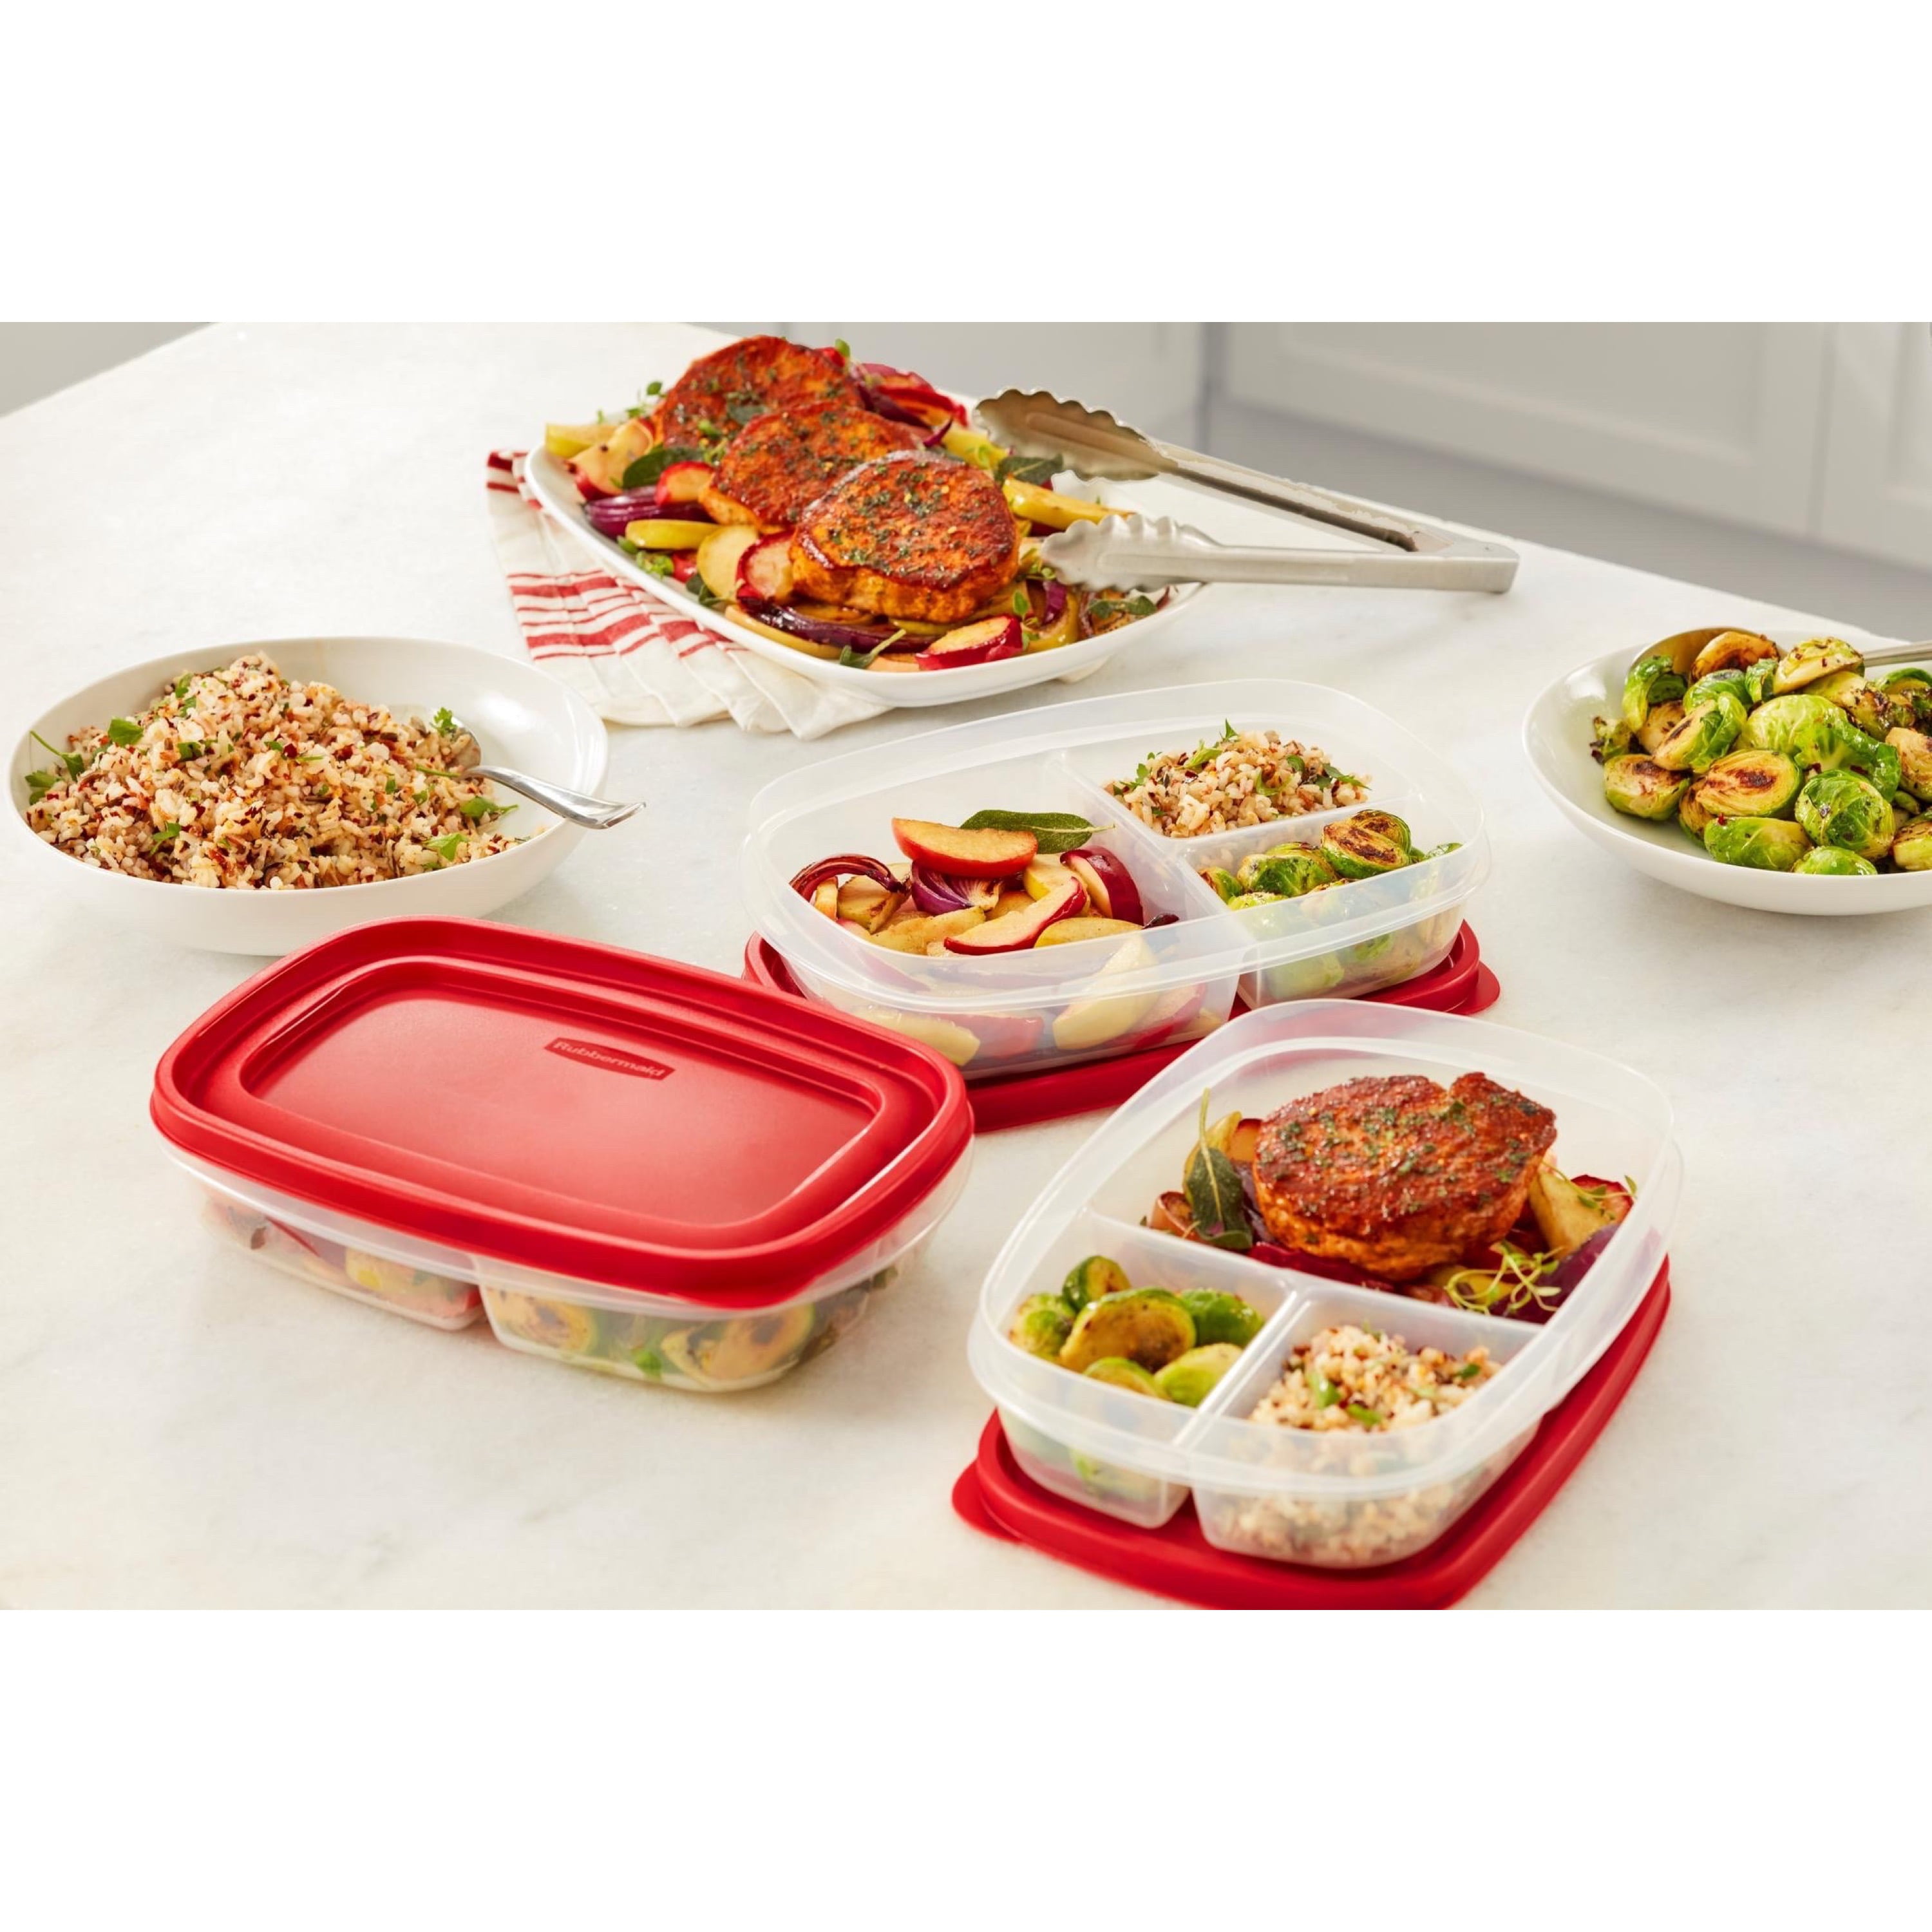  Rubbermaid 16-Piece Food Storage Containers, Red & 32-Piece Food  Storage Containers with Lids for Lunch, Meal Prep, and Leftovers,  Dishwasher Safe, 5-Cup, Black: Home & Kitchen